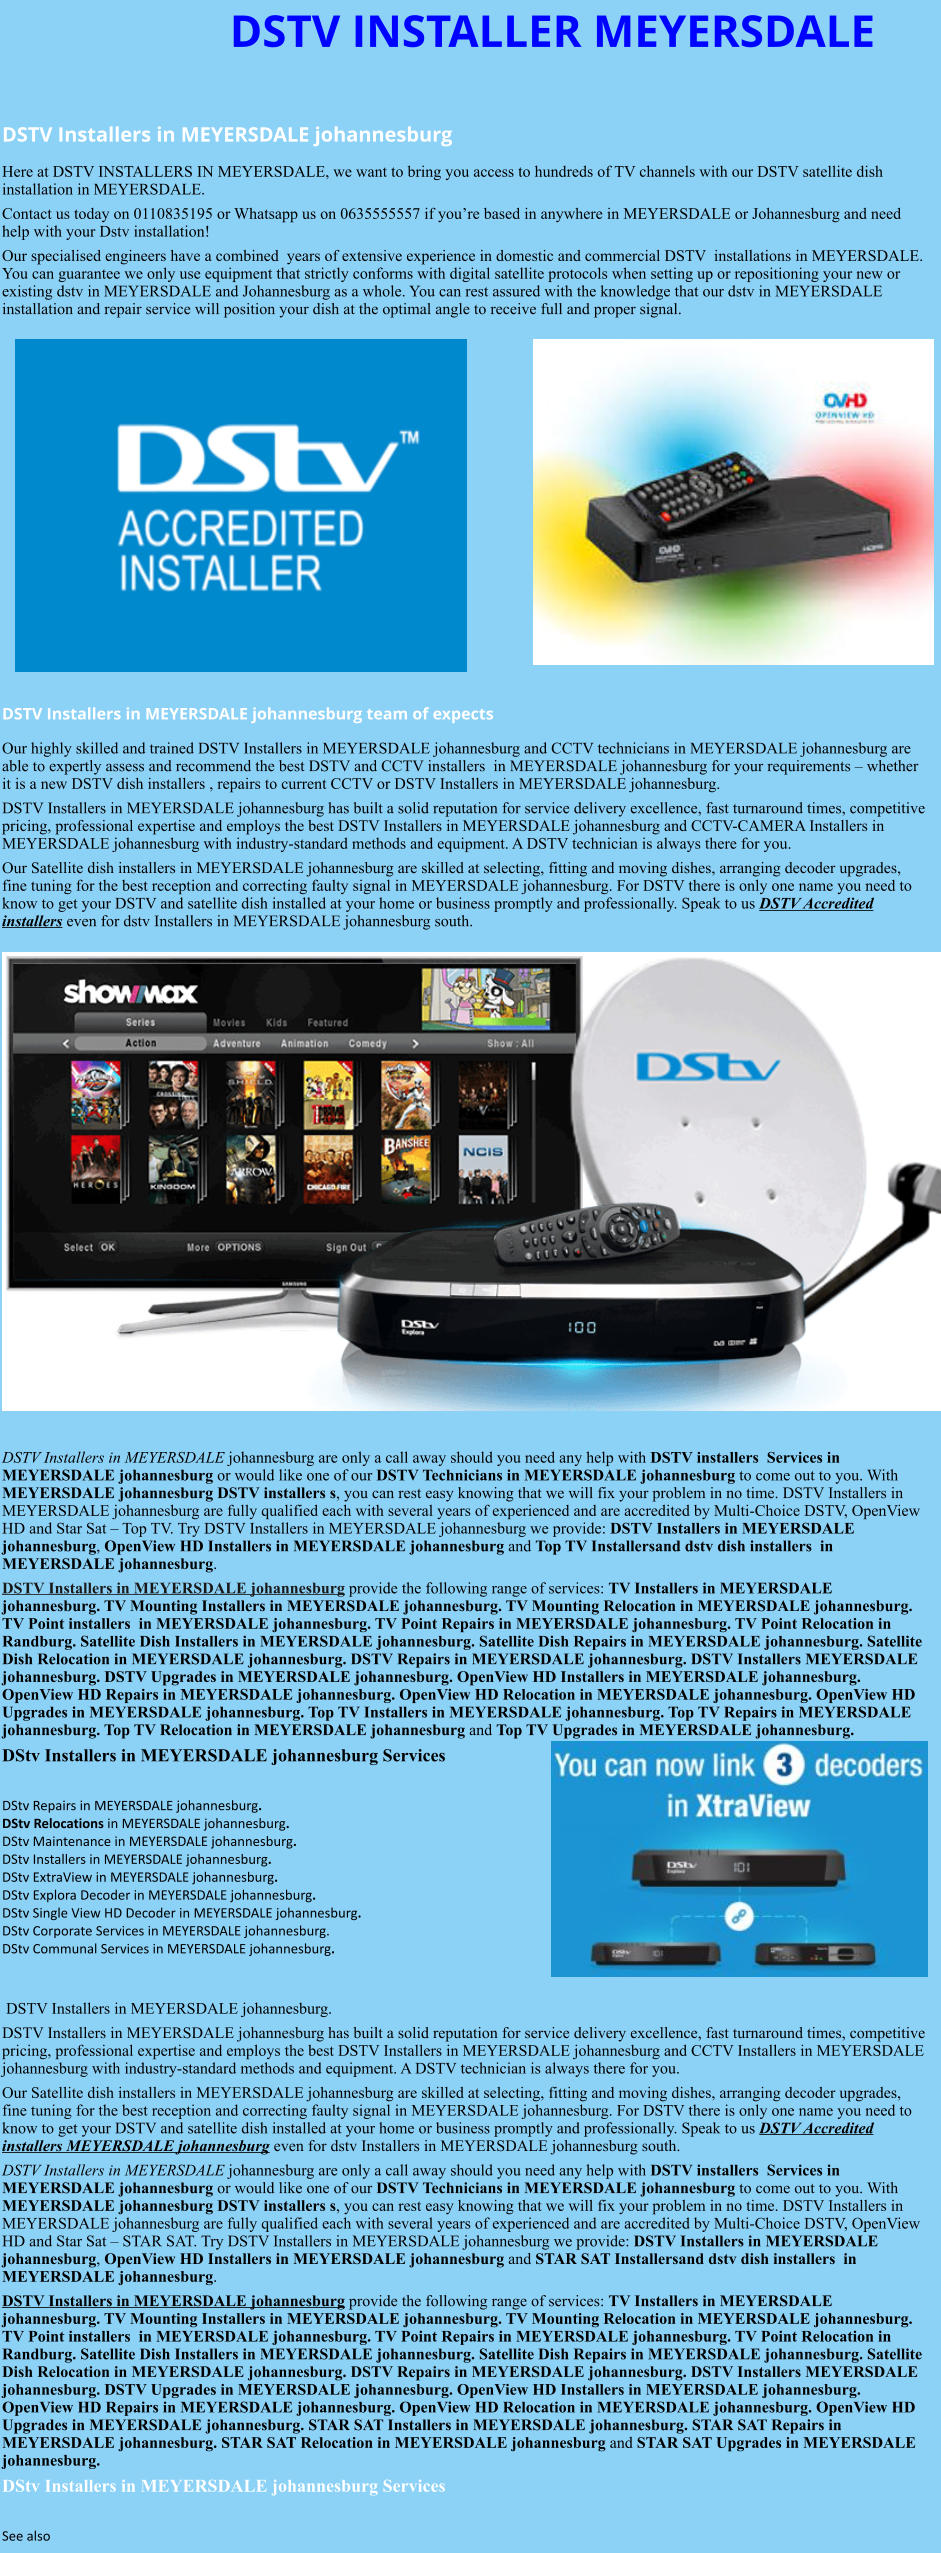 DSTV INSTALLER MEYERSDALE  DSTV Installers in MEYERSDALE johannesburg  Here at DSTV INSTALLERS IN MEYERSDALE, we want to bring you access to hundreds of TV channels with our DSTV satellite dish installation in MEYERSDALE. Contact us today on 0110835195 or Whatsapp us on 0635555557 if you’re based in anywhere in MEYERSDALE or Johannesburg and need help with your Dstv installation! Our specialised engineers have a combined  years of extensive experience in domestic and commercial DSTV  installations in MEYERSDALE. You can guarantee we only use equipment that strictly conforms with digital satellite protocols when setting up or repositioning your new or existing dstv in MEYERSDALE and Johannesburg as a whole. You can rest assured with the knowledge that our dstv in MEYERSDALE installation and repair service will position your dish at the optimal angle to receive full and proper signal.                DSTV Installers in MEYERSDALE johannesburg team of expects Our highly skilled and trained DSTV Installers in MEYERSDALE johannesburg and CCTV technicians in MEYERSDALE johannesburg are able to expertly assess and recommend the best DSTV and CCTV installers  in MEYERSDALE johannesburg for your requirements – whether it is a new DSTV dish installers , repairs to current CCTV or DSTV Installers in MEYERSDALE johannesburg. DSTV Installers in MEYERSDALE johannesburg has built a solid reputation for service delivery excellence, fast turnaround times, competitive pricing, professional expertise and employs the best DSTV Installers in MEYERSDALE johannesburg and CCTV-CAMERA Installers in MEYERSDALE johannesburg with industry-standard methods and equipment. A DSTV technician is always there for you. Our Satellite dish installers in MEYERSDALE johannesburg are skilled at selecting, fitting and moving dishes, arranging decoder upgrades, fine tuning for the best reception and correcting faulty signal in MEYERSDALE johannesburg. For DSTV there is only one name you need to know to get your DSTV and satellite dish installed at your home or business promptly and professionally. Speak to us DSTV Accredited installers even for dstv Installers in MEYERSDALE johannesburg south.                      DSTV Installers in MEYERSDALE johannesburg are only a call away should you need any help with DSTV installers  Services in MEYERSDALE johannesburg or would like one of our DSTV Technicians in MEYERSDALE johannesburg to come out to you. With MEYERSDALE johannesburg DSTV installers s, you can rest easy knowing that we will fix your problem in no time. DSTV Installers in MEYERSDALE johannesburg are fully qualified each with several years of experienced and are accredited by Multi-Choice DSTV, OpenView HD and Star Sat – Top TV. Try DSTV Installers in MEYERSDALE johannesburg we provide: DSTV Installers in MEYERSDALE johannesburg, OpenView HD Installers in MEYERSDALE johannesburg and Top TV Installersand dstv dish installers  in MEYERSDALE johannesburg. DSTV Installers in MEYERSDALE johannesburg provide the following range of services: TV Installers in MEYERSDALE johannesburg. TV Mounting Installers in MEYERSDALE johannesburg. TV Mounting Relocation in MEYERSDALE johannesburg. TV Point installers  in MEYERSDALE johannesburg. TV Point Repairs in MEYERSDALE johannesburg. TV Point Relocation in Randburg. Satellite Dish Installers in MEYERSDALE johannesburg. Satellite Dish Repairs in MEYERSDALE johannesburg. Satellite Dish Relocation in MEYERSDALE johannesburg. DSTV Repairs in MEYERSDALE johannesburg. DSTV Installers MEYERSDALE johannesburg. DSTV Upgrades in MEYERSDALE johannesburg. OpenView HD Installers in MEYERSDALE johannesburg. OpenView HD Repairs in MEYERSDALE johannesburg. OpenView HD Relocation in MEYERSDALE johannesburg. OpenView HD Upgrades in MEYERSDALE johannesburg. Top TV Installers in MEYERSDALE johannesburg. Top TV Repairs in MEYERSDALE johannesburg. Top TV Relocation in MEYERSDALE johannesburg and Top TV Upgrades in MEYERSDALE johannesburg. DStv Installers in MEYERSDALE johannesburg Services  DStv Repairs in MEYERSDALE johannesburg.  DStv Relocations in MEYERSDALE johannesburg.  DStv Maintenance in MEYERSDALE johannesburg. DStv Installers in MEYERSDALE johannesburg. DStv ExtraView in MEYERSDALE johannesburg. DStv Explora Decoder in MEYERSDALE johannesburg. DStv Single View HD Decoder in MEYERSDALE johannesburg. DStv Corporate Services in MEYERSDALE johannesburg. DStv Communal Services in MEYERSDALE johannesburg.    DSTV Installers in MEYERSDALE johannesburg. DSTV Installers in MEYERSDALE johannesburg has built a solid reputation for service delivery excellence, fast turnaround times, competitive pricing, professional expertise and employs the best DSTV Installers in MEYERSDALE johannesburg and CCTV Installers in MEYERSDALE johannesburg with industry-standard methods and equipment. A DSTV technician is always there for you. Our Satellite dish installers in MEYERSDALE johannesburg are skilled at selecting, fitting and moving dishes, arranging decoder upgrades, fine tuning for the best reception and correcting faulty signal in MEYERSDALE johannesburg. For DSTV there is only one name you need to know to get your DSTV and satellite dish installed at your home or business promptly and professionally. Speak to us DSTV Accredited installers MEYERSDALE johannesburg even for dstv Installers in MEYERSDALE johannesburg south. DSTV Installers in MEYERSDALE johannesburg are only a call away should you need any help with DSTV installers  Services in MEYERSDALE johannesburg or would like one of our DSTV Technicians in MEYERSDALE johannesburg to come out to you. With MEYERSDALE johannesburg DSTV installers s, you can rest easy knowing that we will fix your problem in no time. DSTV Installers in MEYERSDALE johannesburg are fully qualified each with several years of experienced and are accredited by Multi-Choice DSTV, OpenView HD and Star Sat – STAR SAT. Try DSTV Installers in MEYERSDALE johannesburg we provide: DSTV Installers in MEYERSDALE johannesburg, OpenView HD Installers in MEYERSDALE johannesburg and STAR SAT Installersand dstv dish installers  in MEYERSDALE johannesburg. DSTV Installers in MEYERSDALE johannesburg provide the following range of services: TV Installers in MEYERSDALE johannesburg. TV Mounting Installers in MEYERSDALE johannesburg. TV Mounting Relocation in MEYERSDALE johannesburg. TV Point installers  in MEYERSDALE johannesburg. TV Point Repairs in MEYERSDALE johannesburg. TV Point Relocation in Randburg. Satellite Dish Installers in MEYERSDALE johannesburg. Satellite Dish Repairs in MEYERSDALE johannesburg. Satellite Dish Relocation in MEYERSDALE johannesburg. DSTV Repairs in MEYERSDALE johannesburg. DSTV Installers MEYERSDALE johannesburg. DSTV Upgrades in MEYERSDALE johannesburg. OpenView HD Installers in MEYERSDALE johannesburg. OpenView HD Repairs in MEYERSDALE johannesburg. OpenView HD Relocation in MEYERSDALE johannesburg. OpenView HD Upgrades in MEYERSDALE johannesburg. STAR SAT Installers in MEYERSDALE johannesburg. STAR SAT Repairs in MEYERSDALE johannesburg. STAR SAT Relocation in MEYERSDALE johannesburg and STAR SAT Upgrades in MEYERSDALE johannesburg. DStv Installers in MEYERSDALE johannesburg Services  See also